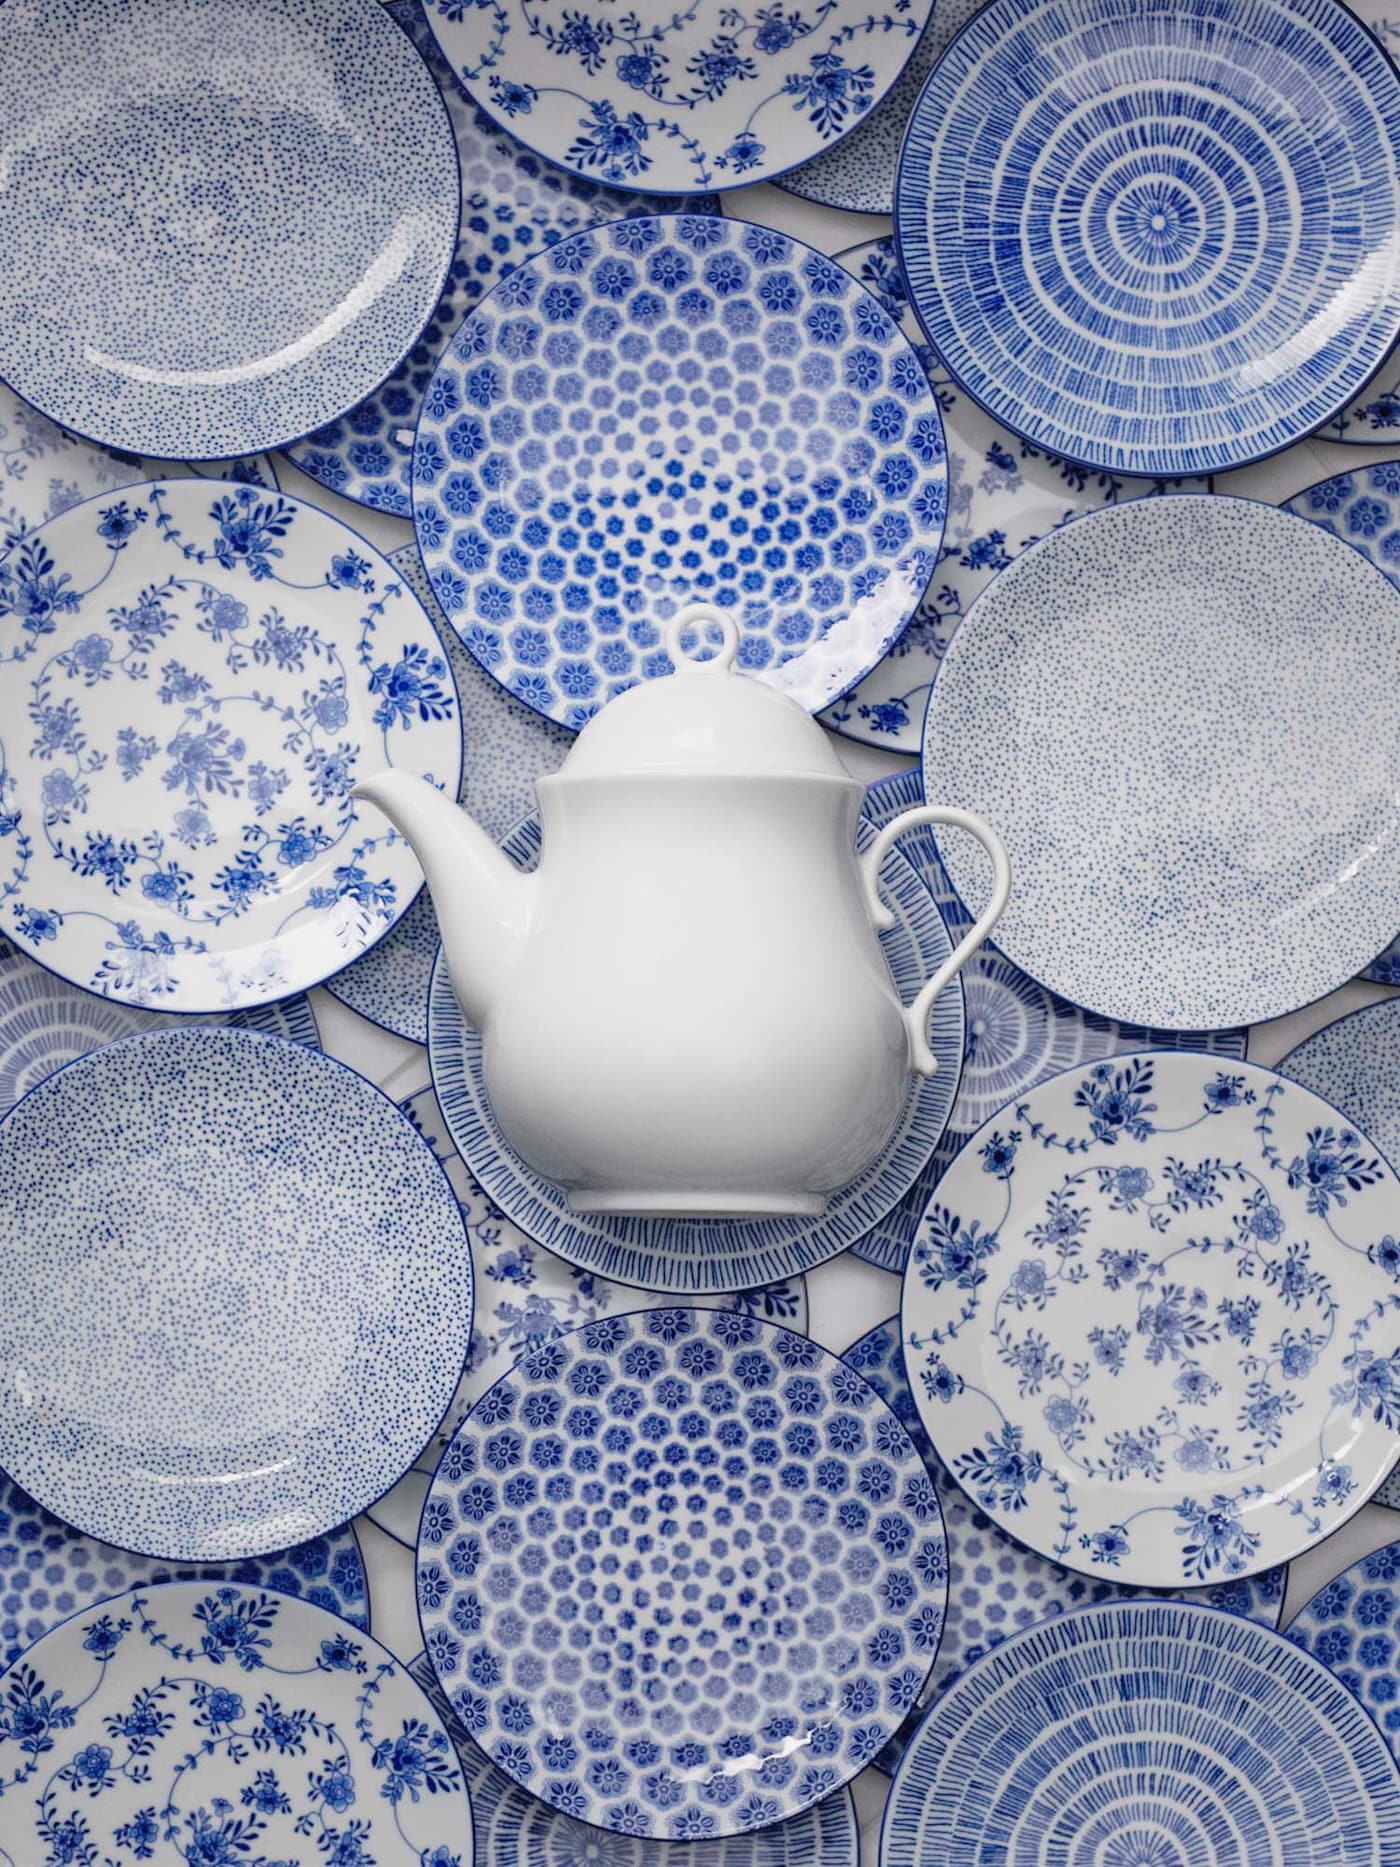 Collection of blue and white patterned ENTUSIASM side plates are spread out, with a white porcelain teapot in the centre.